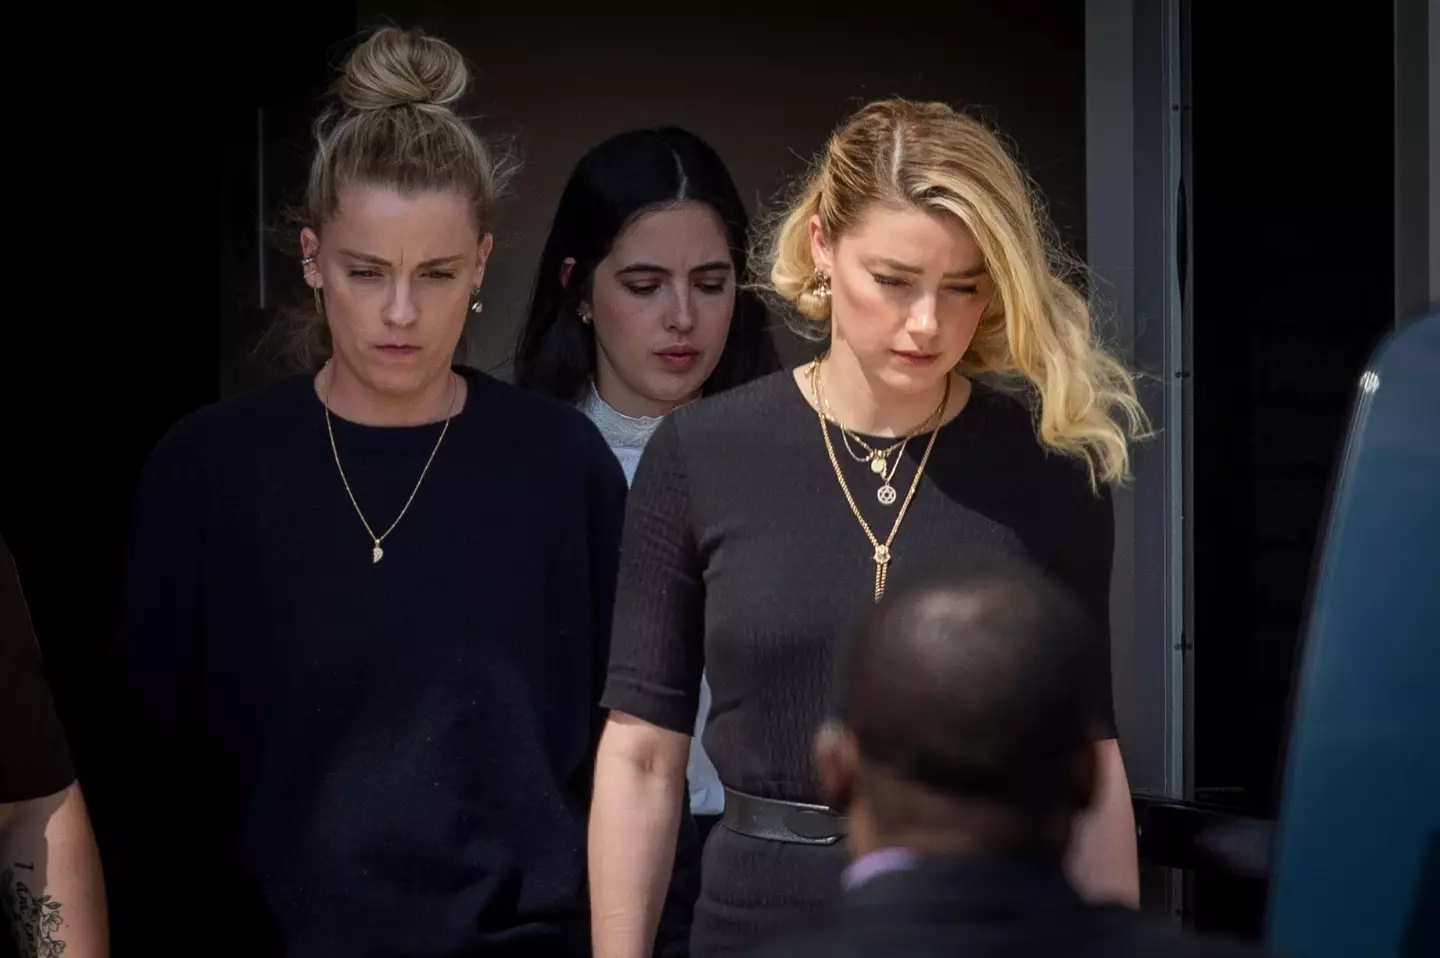 Amber Heard was ordered to pay $10.4 million to her ex-husband.